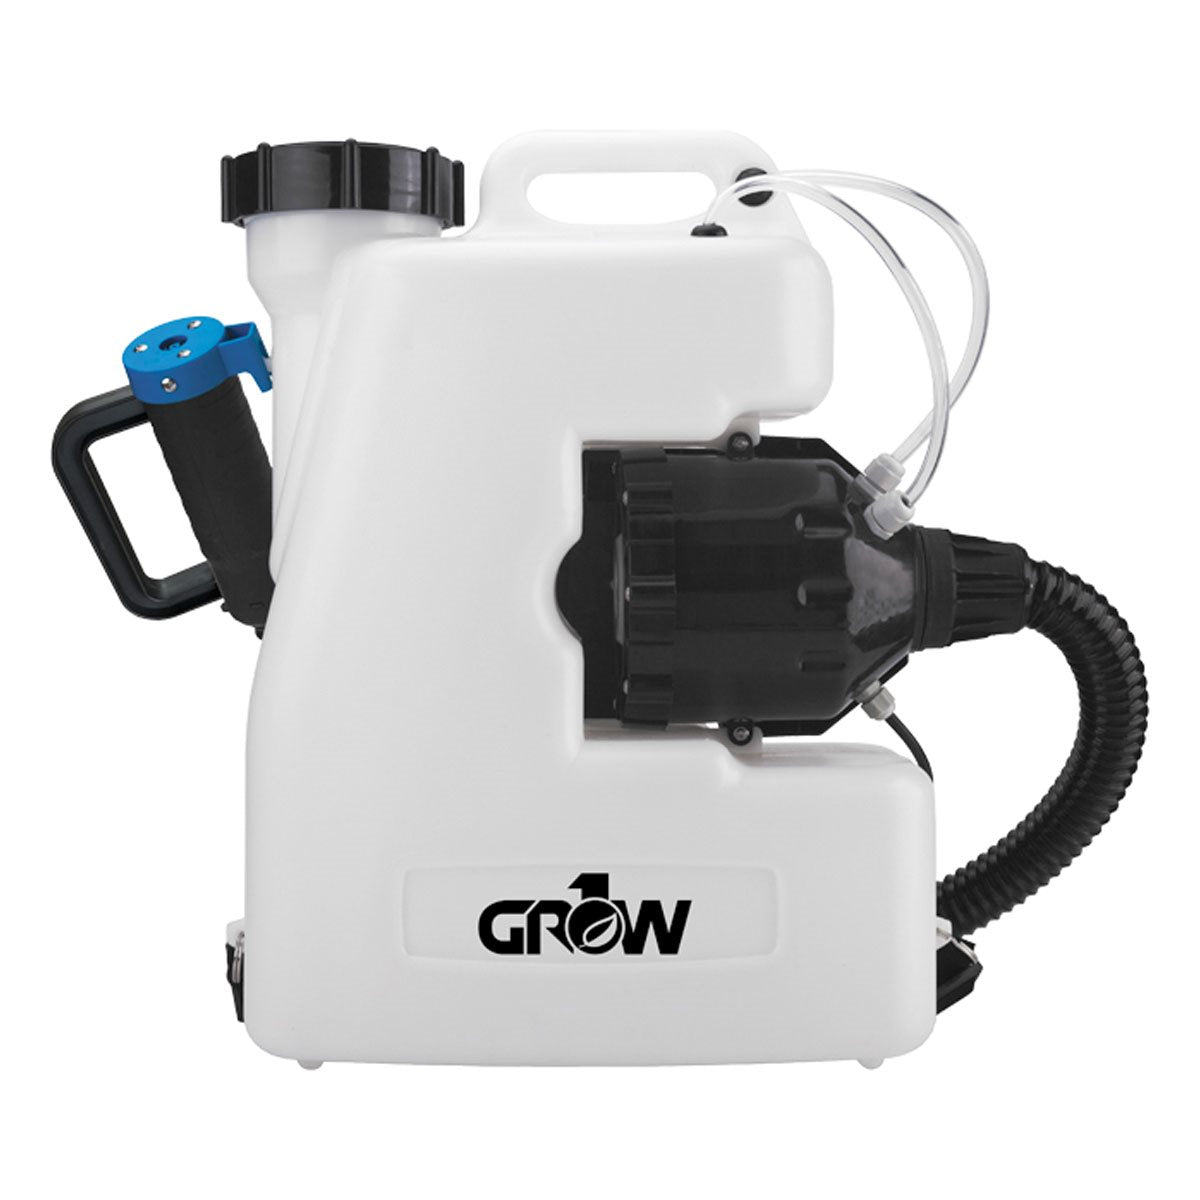 Product Image:Grow1 Electric Backpack Fogger ULV Atomizer 4 Gallon